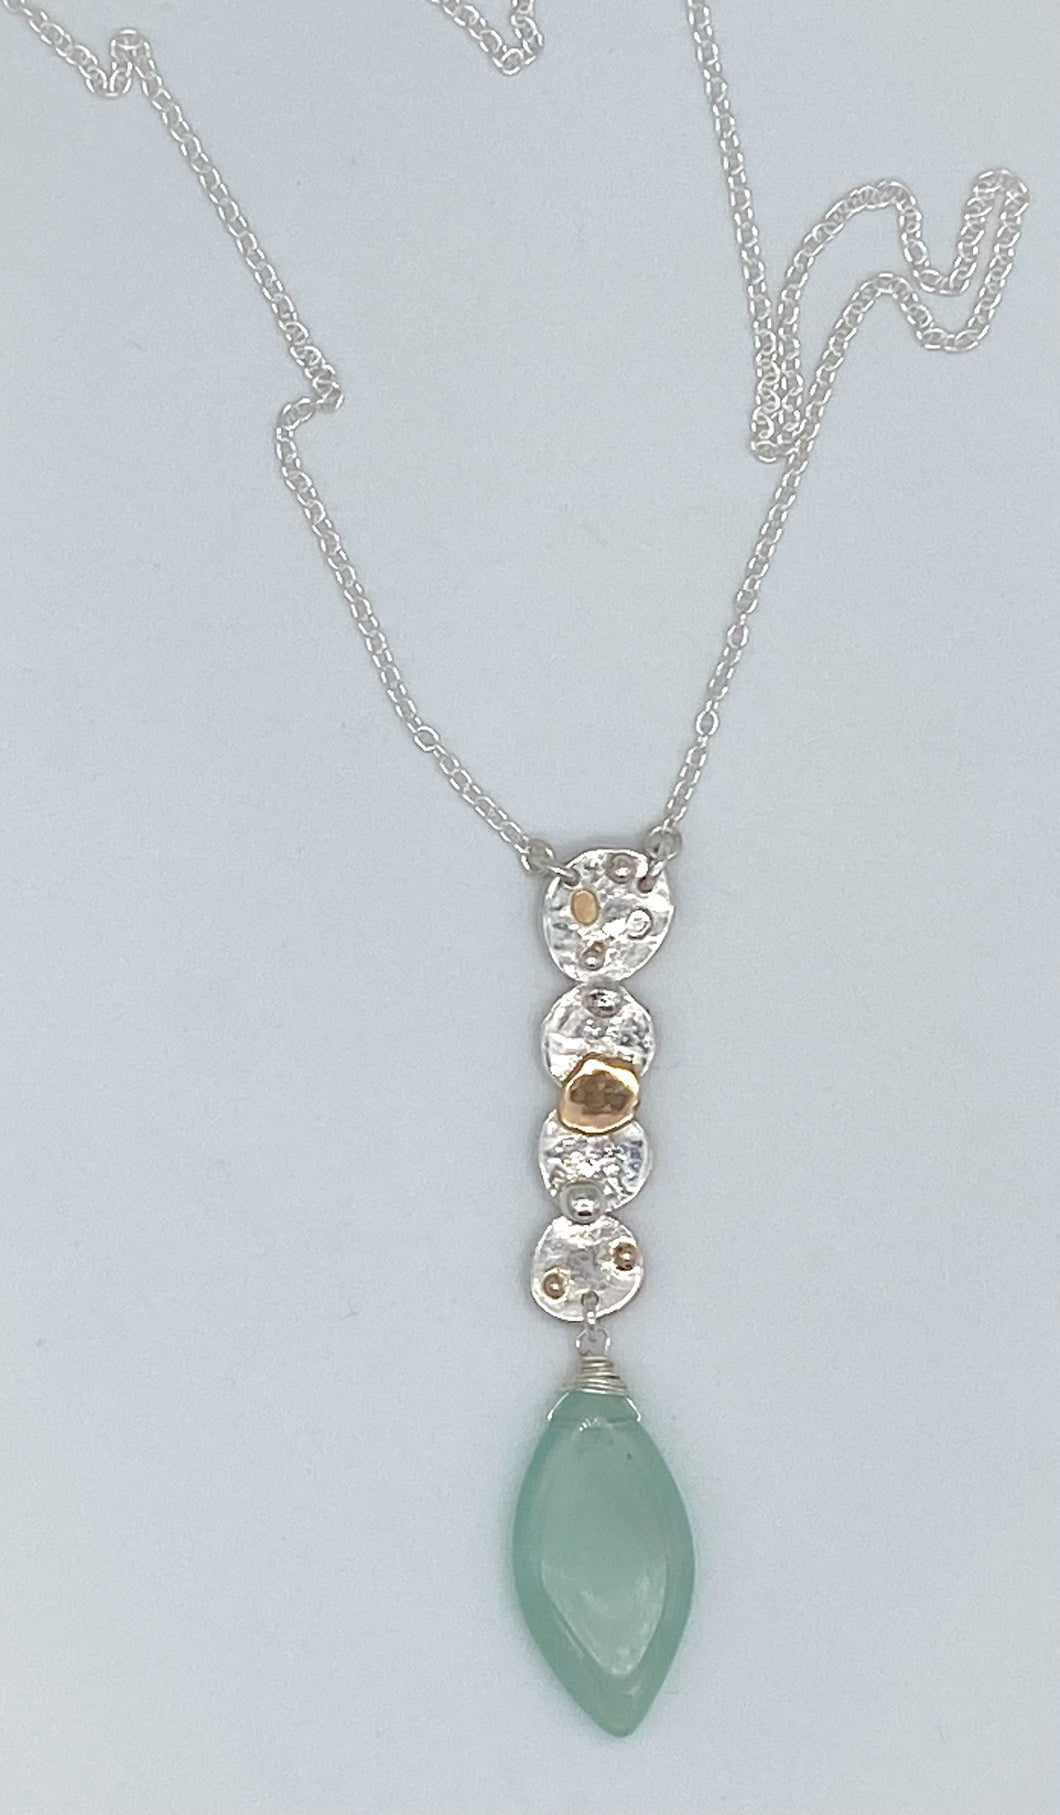 Chalcedony, gold, and silver necklace ￼